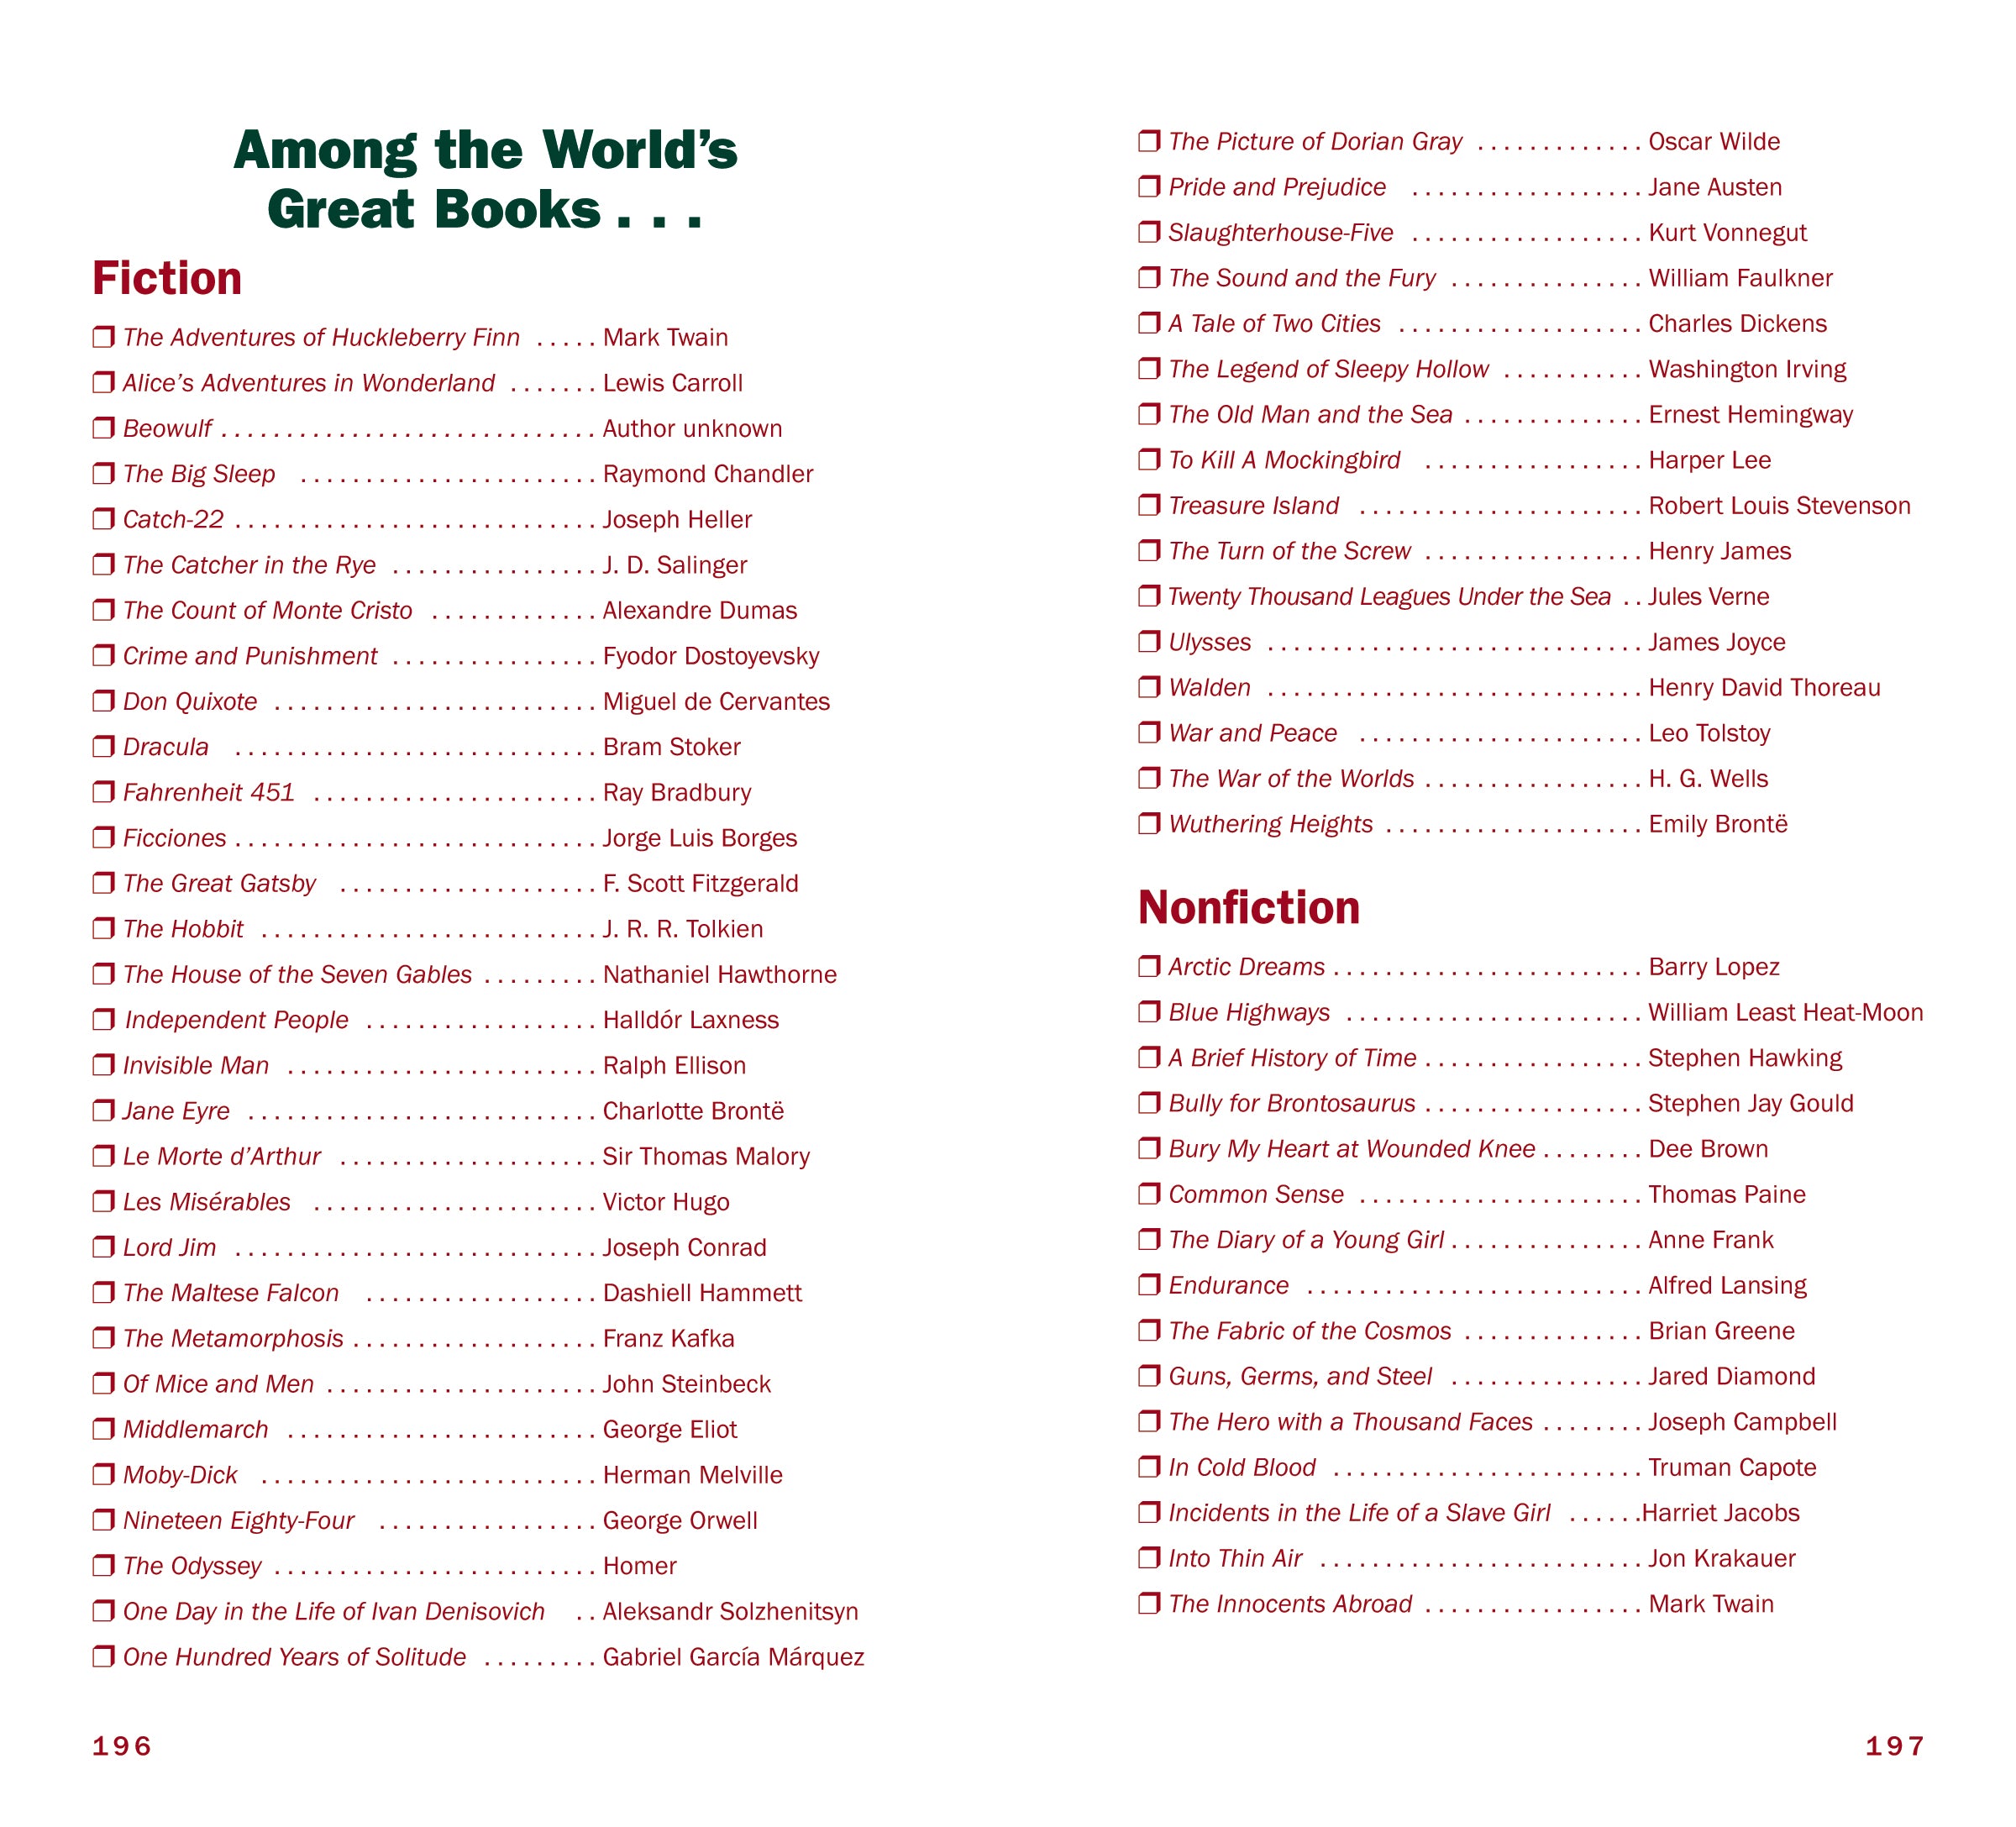 two pages with a checklist of different well-known books with the title "Among the World's Great Books..."